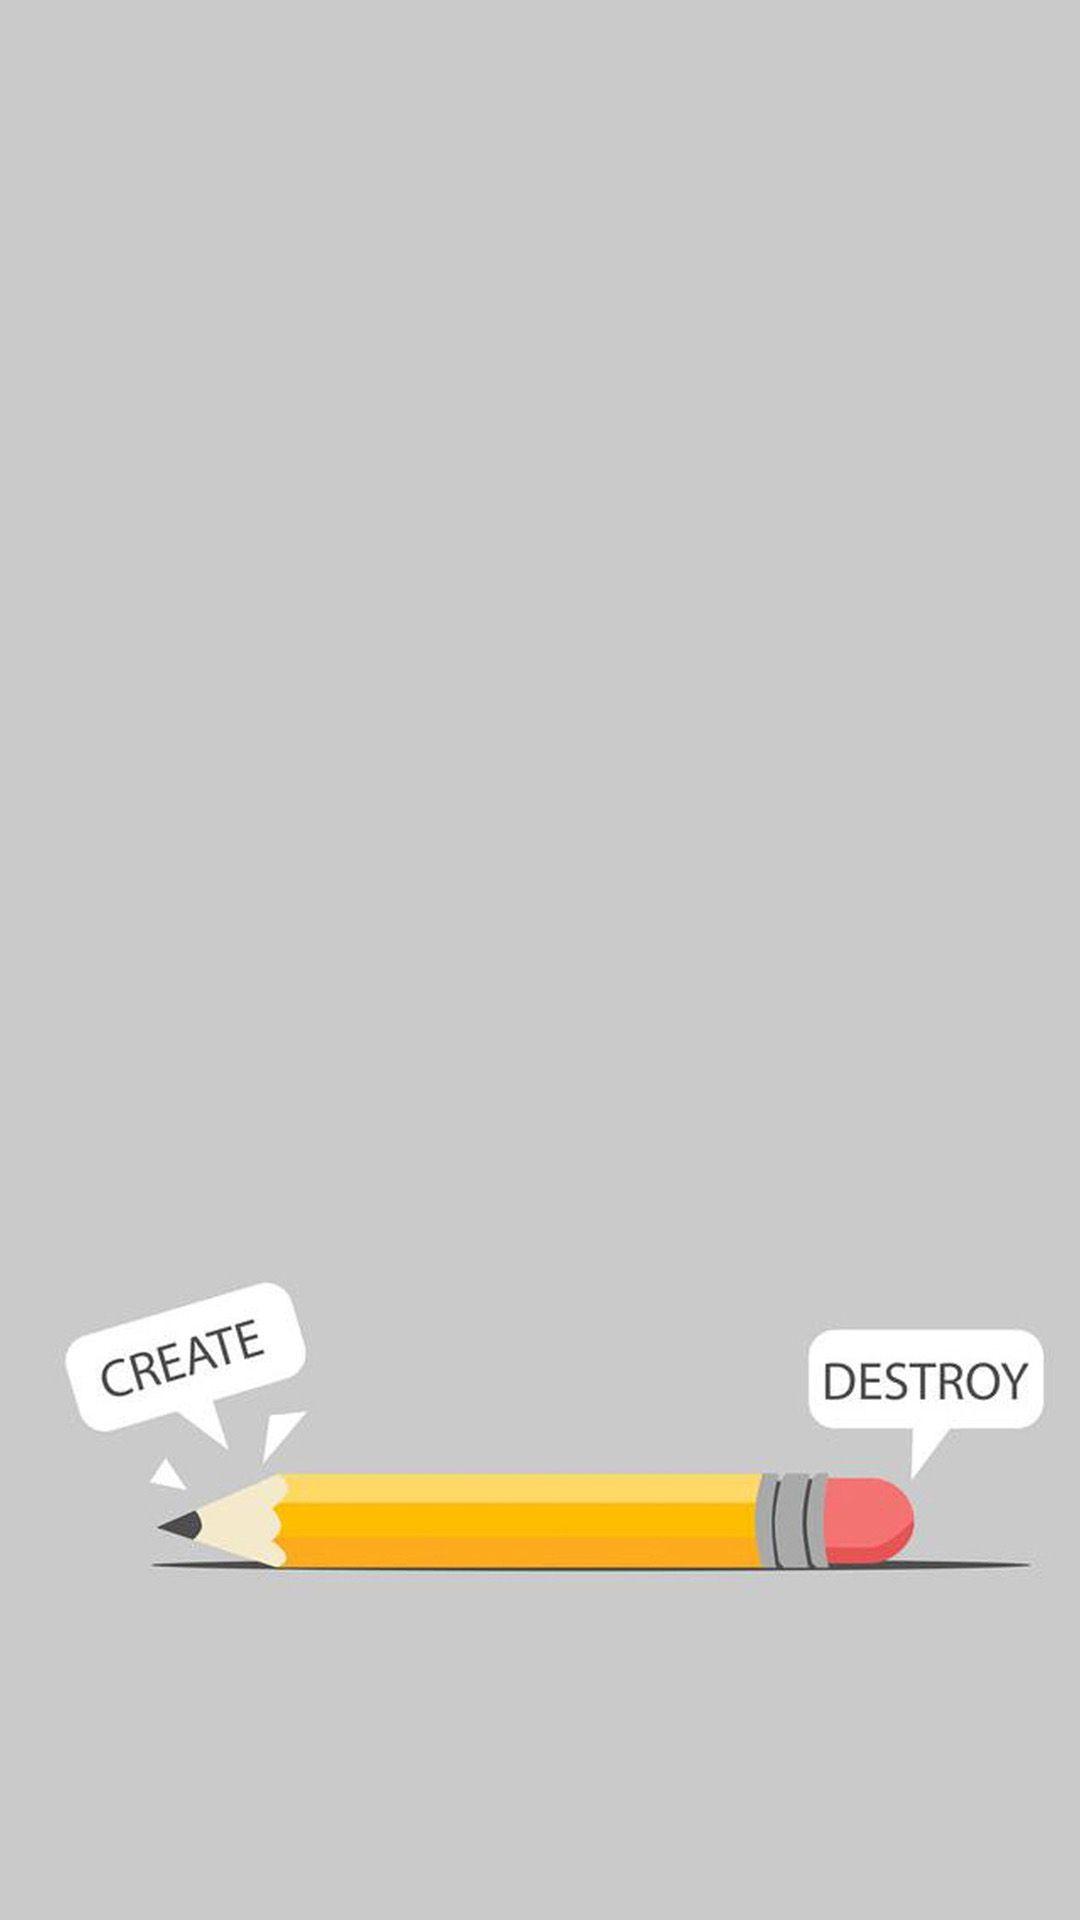 Create or destroy? Tap to see more Cute & Funny Cartoon iPhone